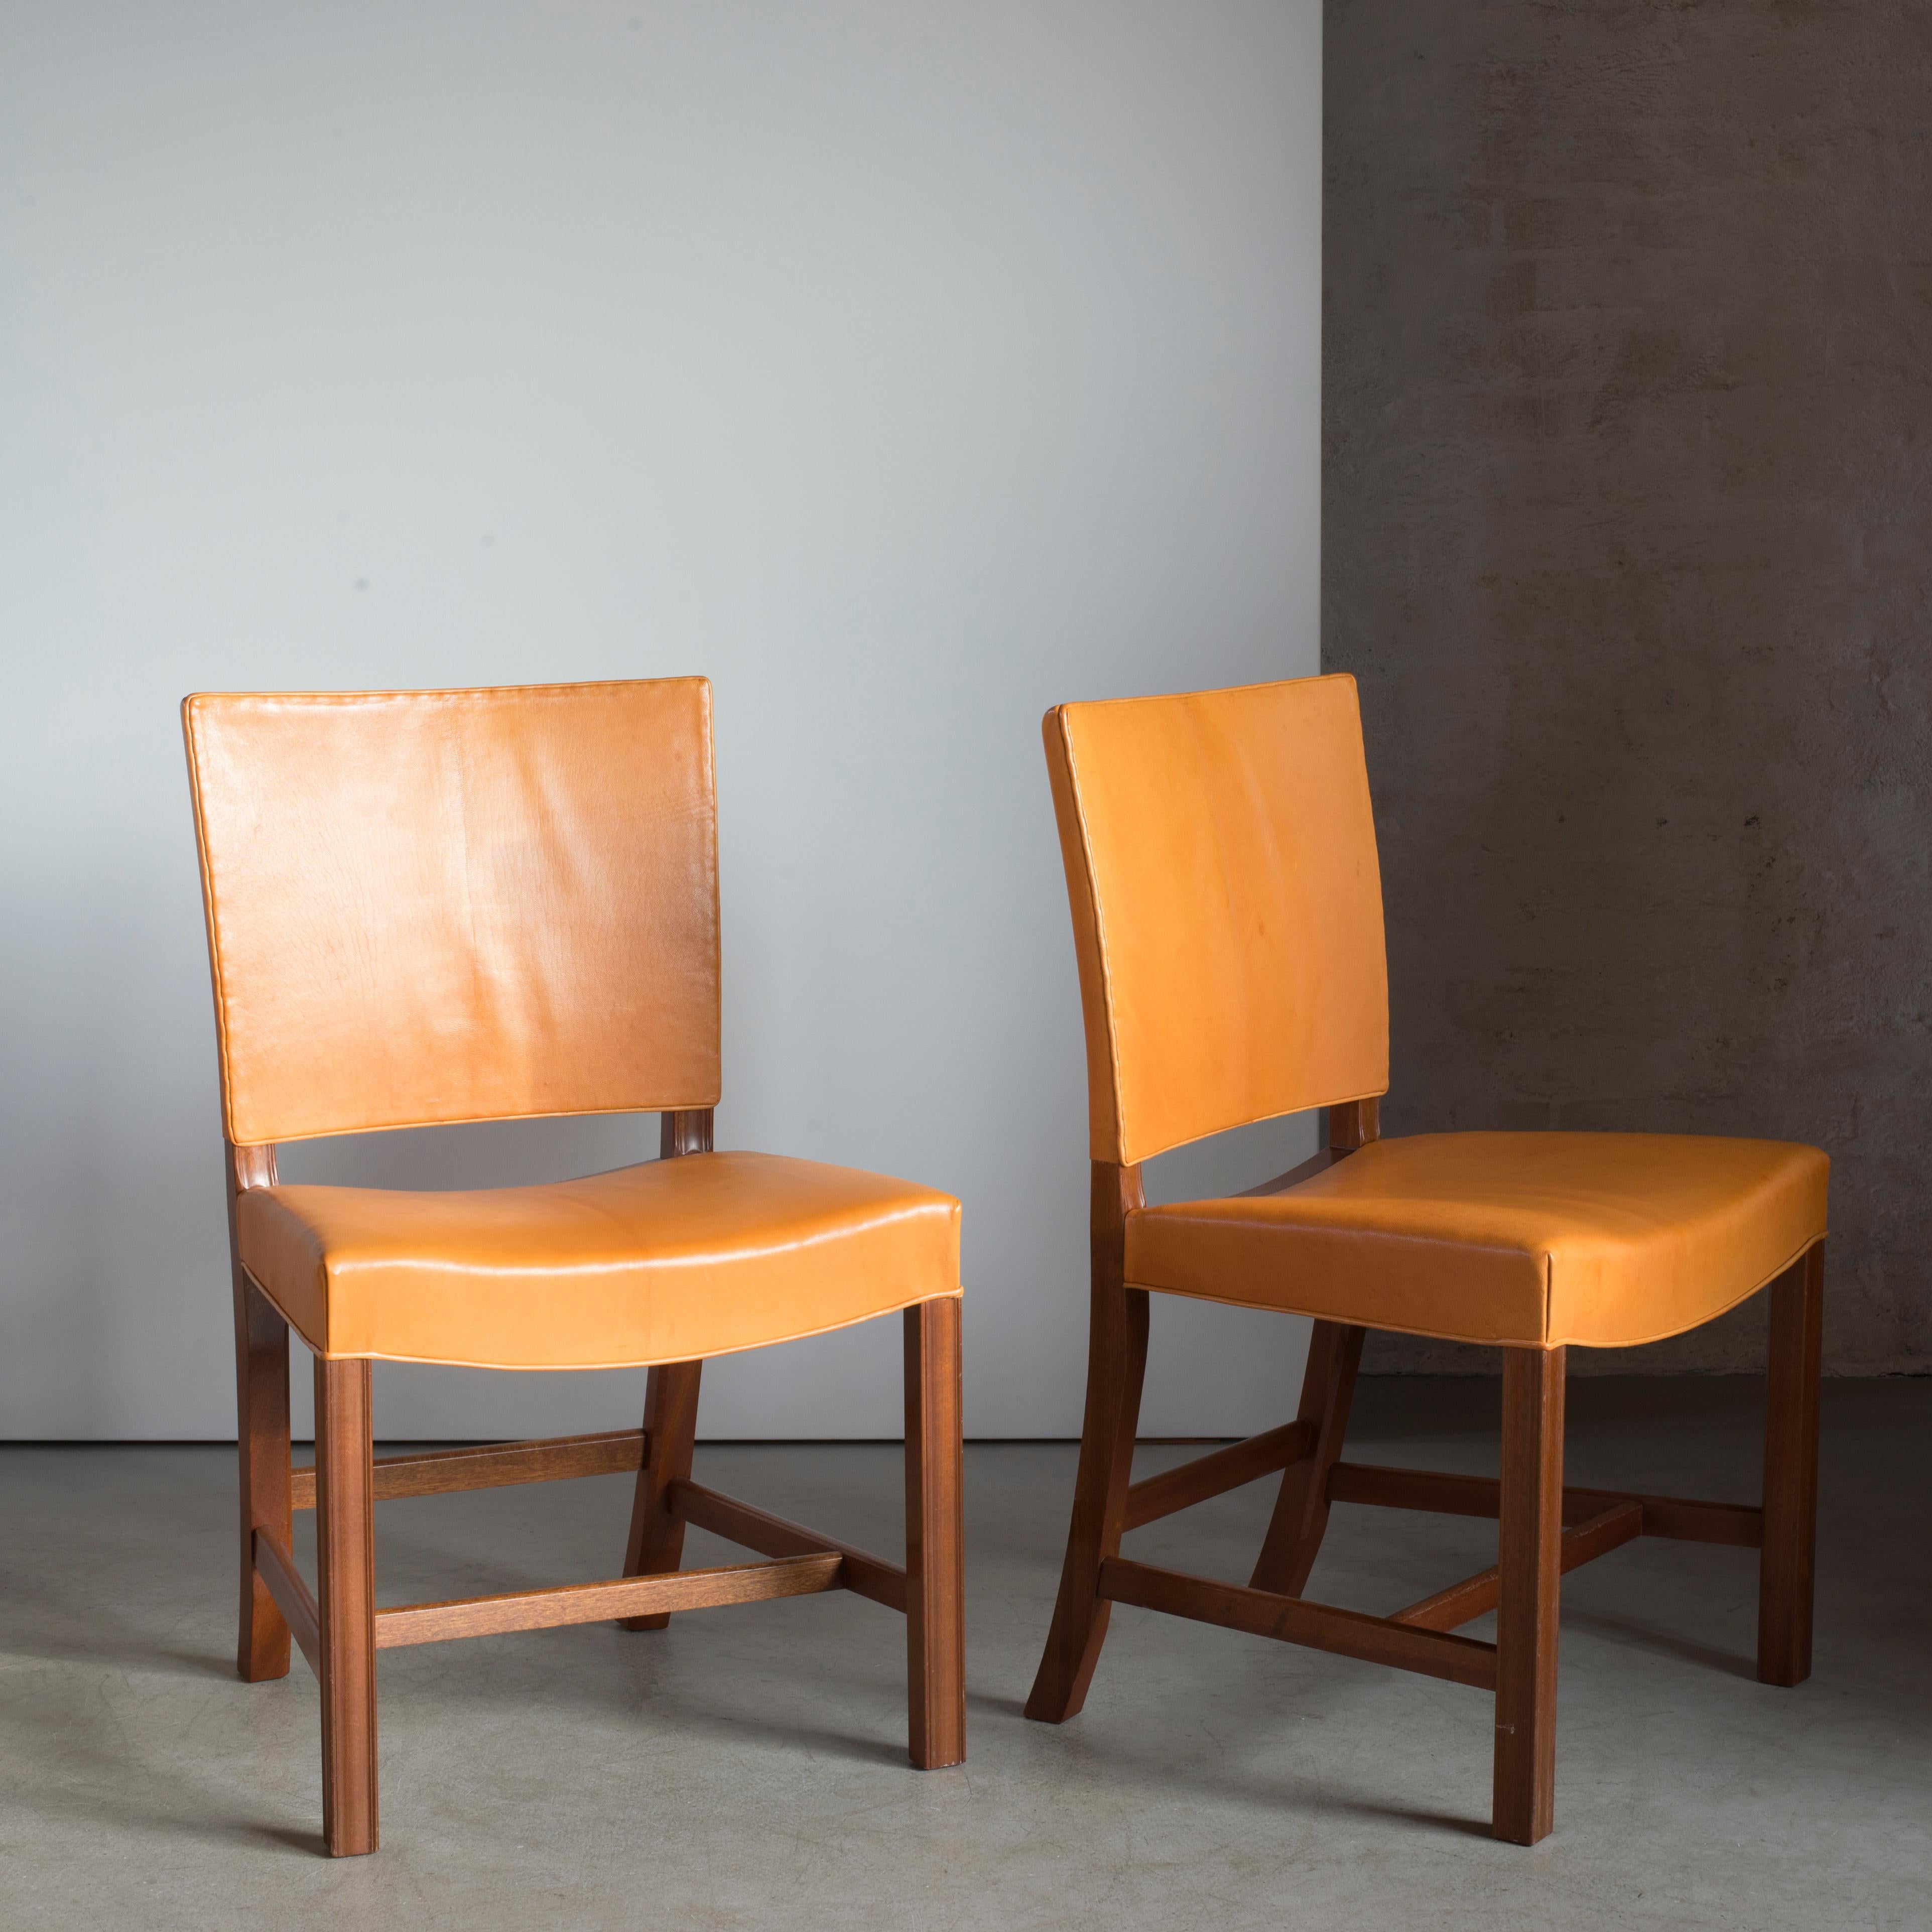 Kaare Klint pair of red chairs, mahogany, leather and brass. Executed by Rud. Rasmussen.